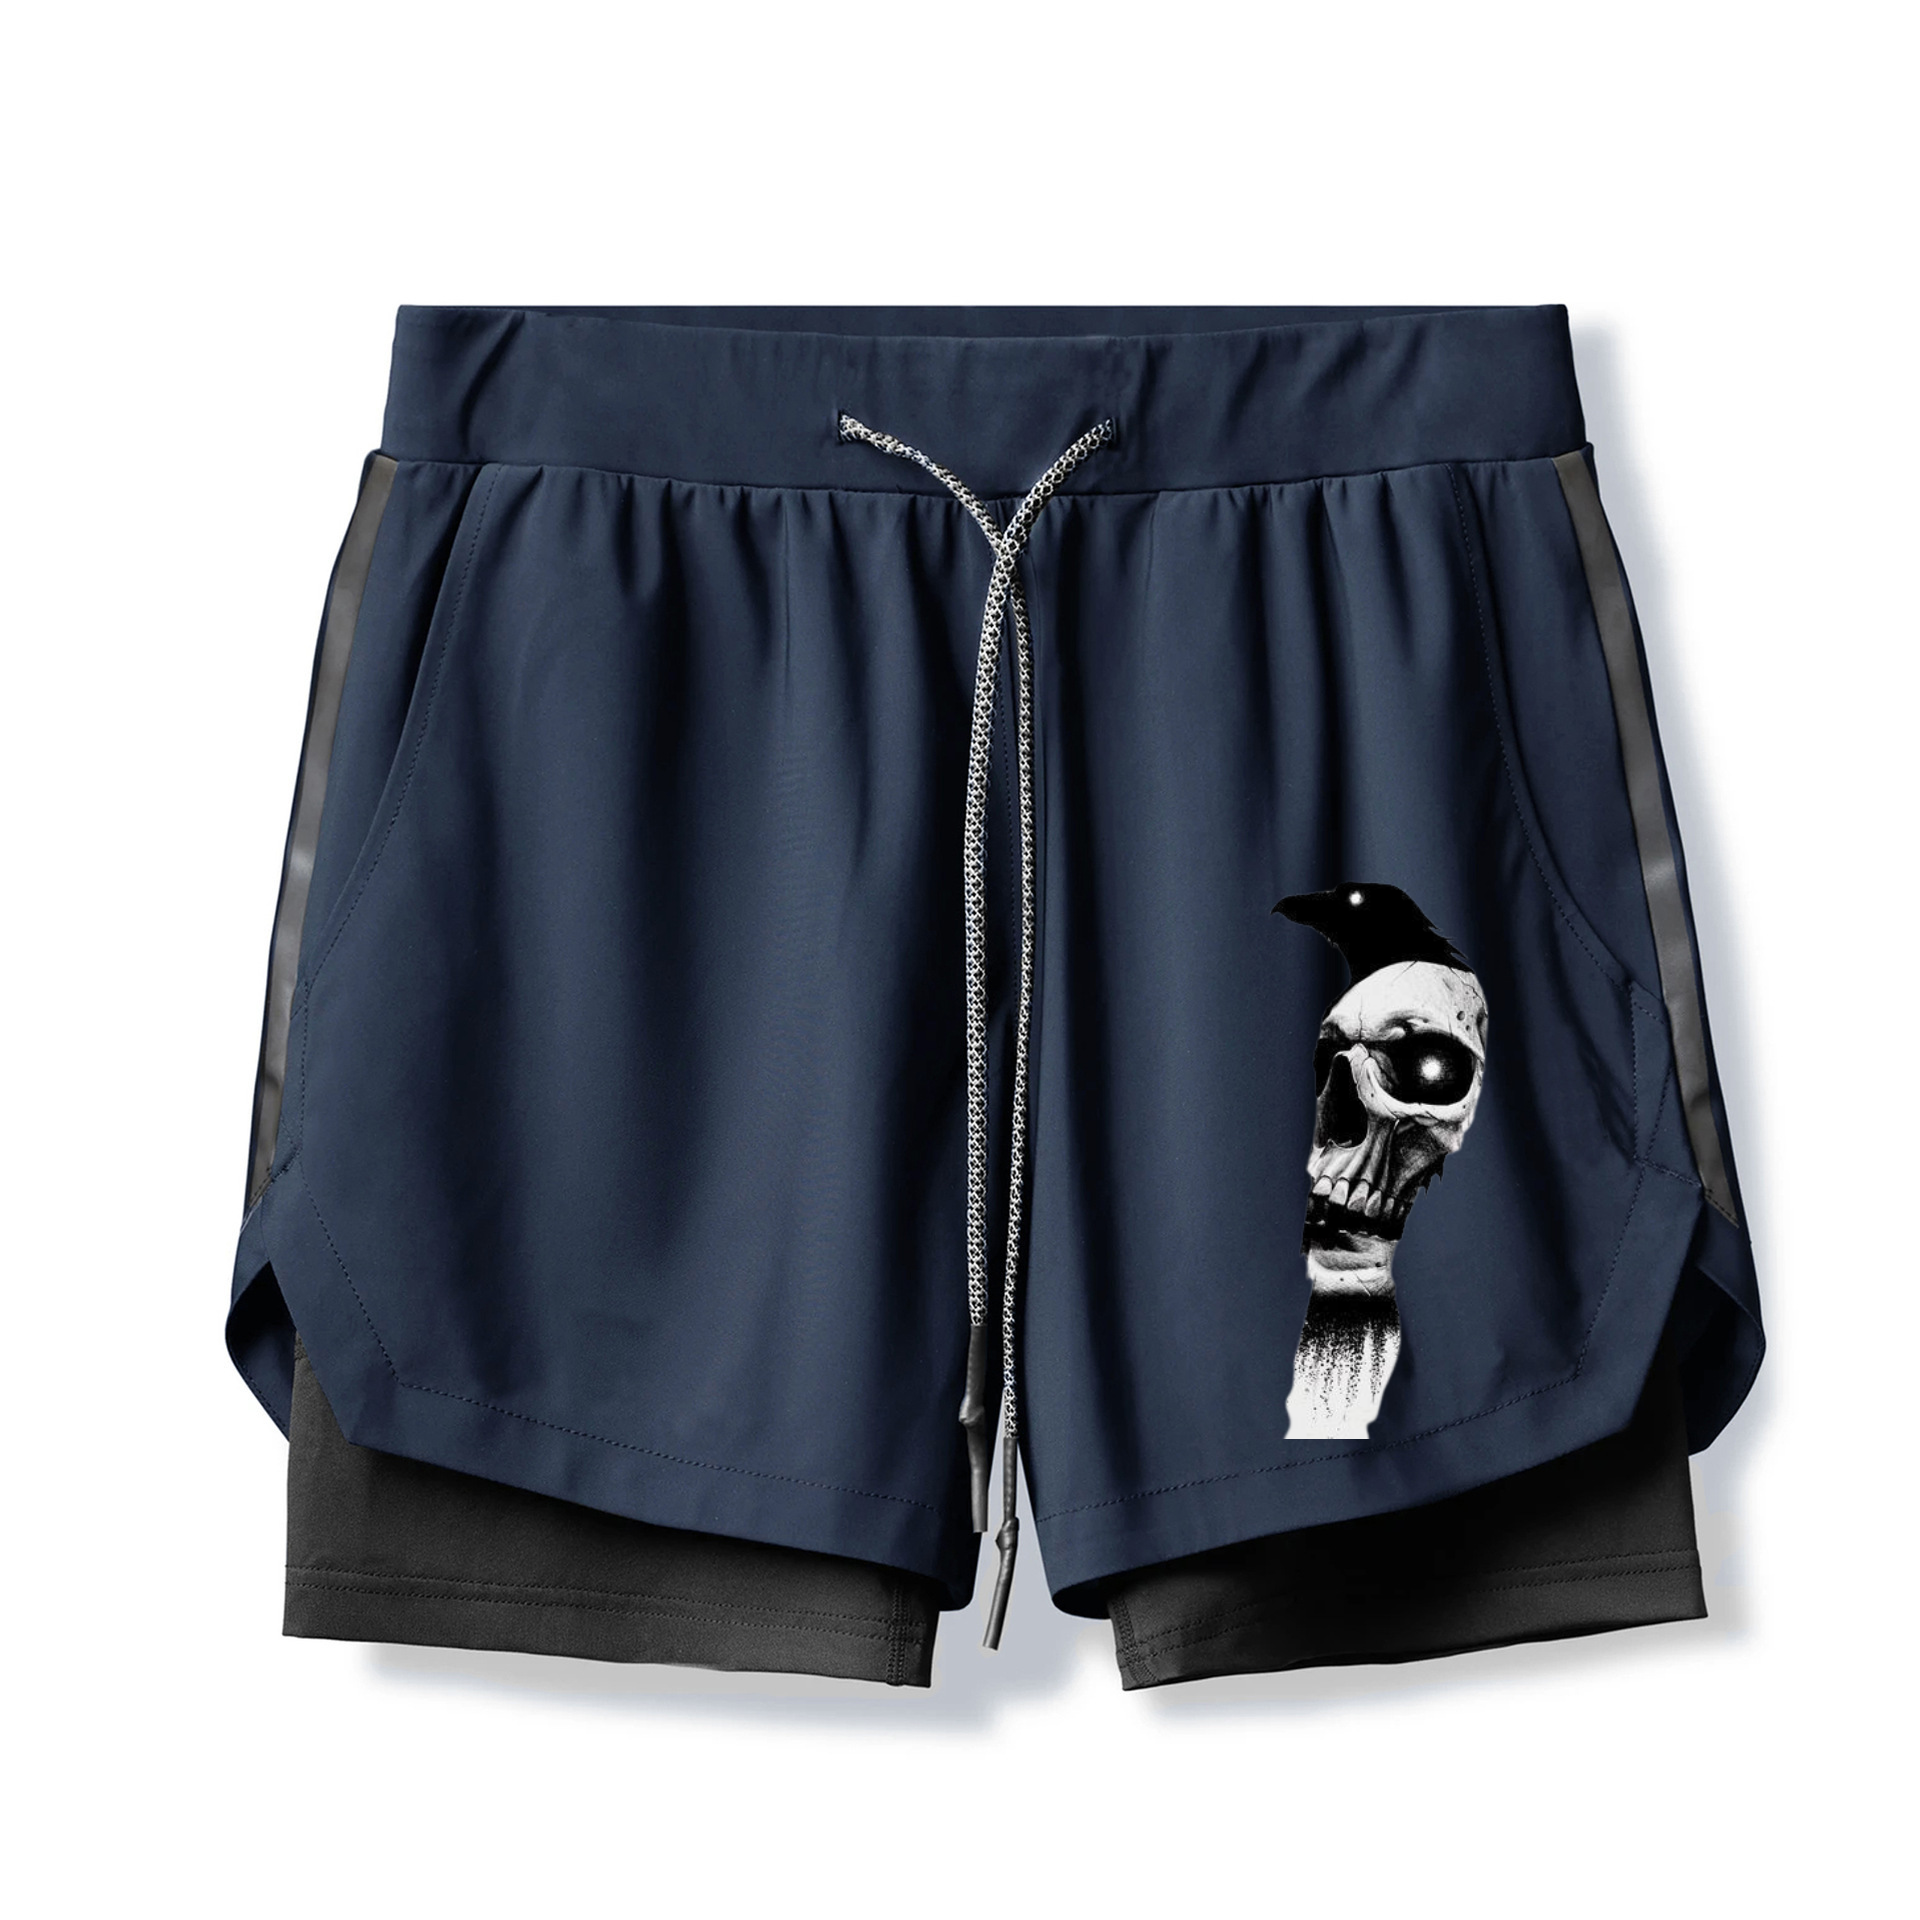 Raven and Skull Print 2 In 1 Gym Shorts for Men